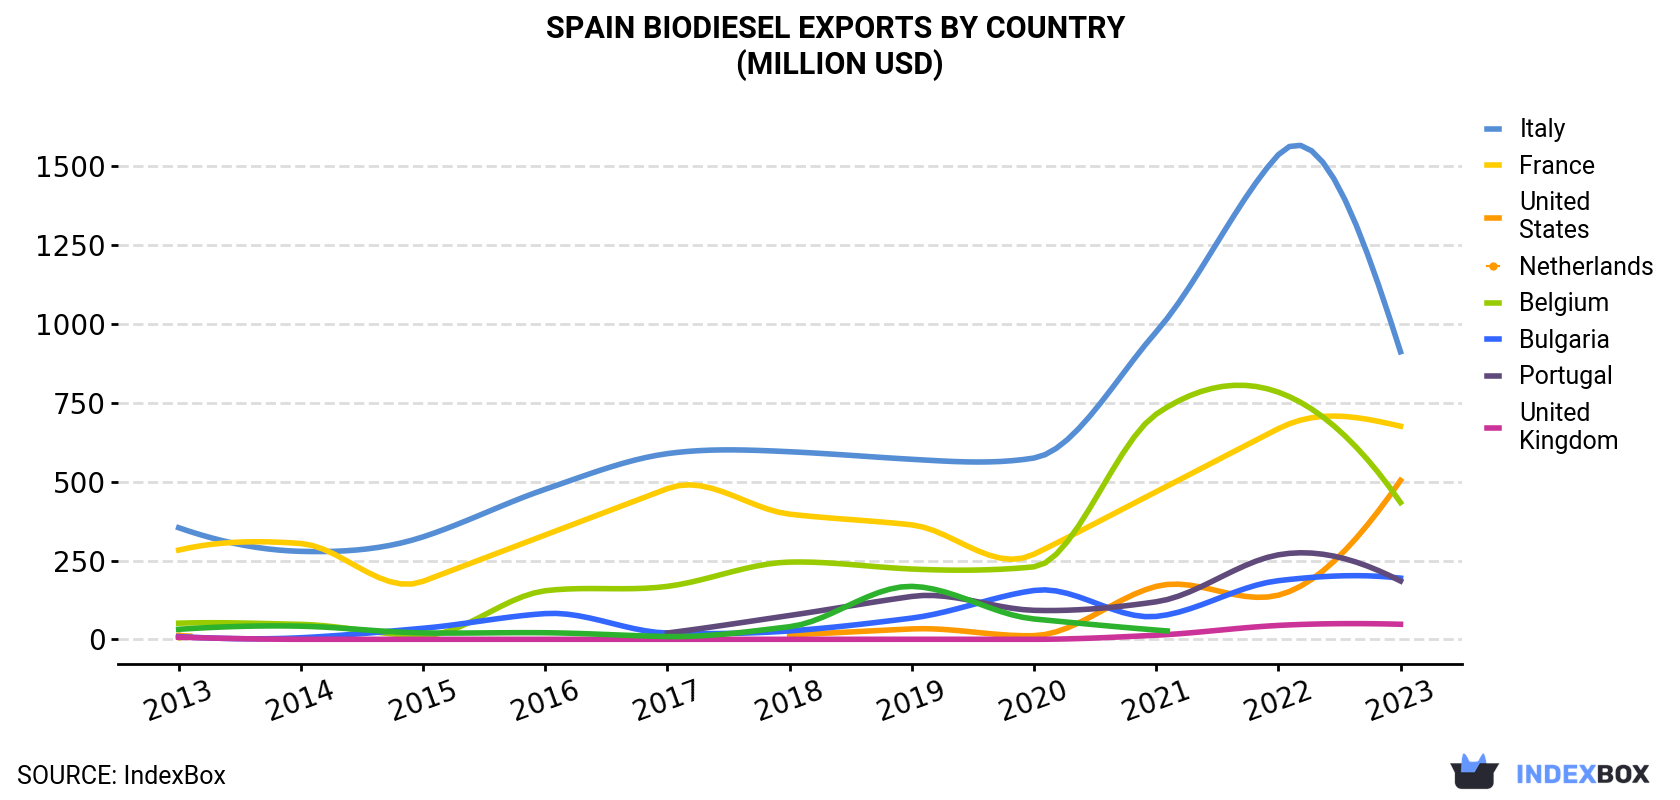 Spain Biodiesel Exports By Country (Million USD)